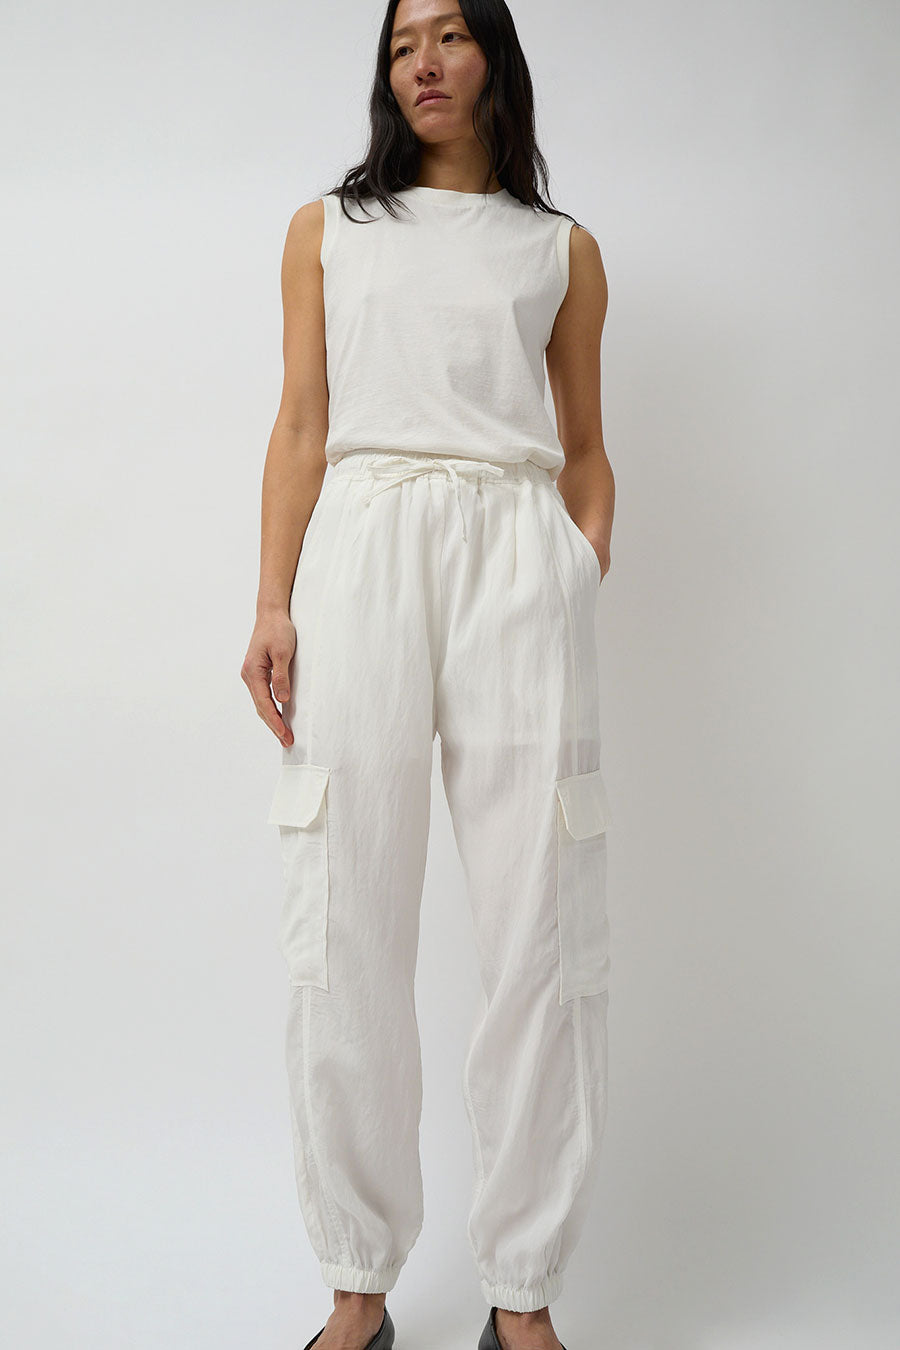 Mijeong Park Lightweight Cargo Pants in White